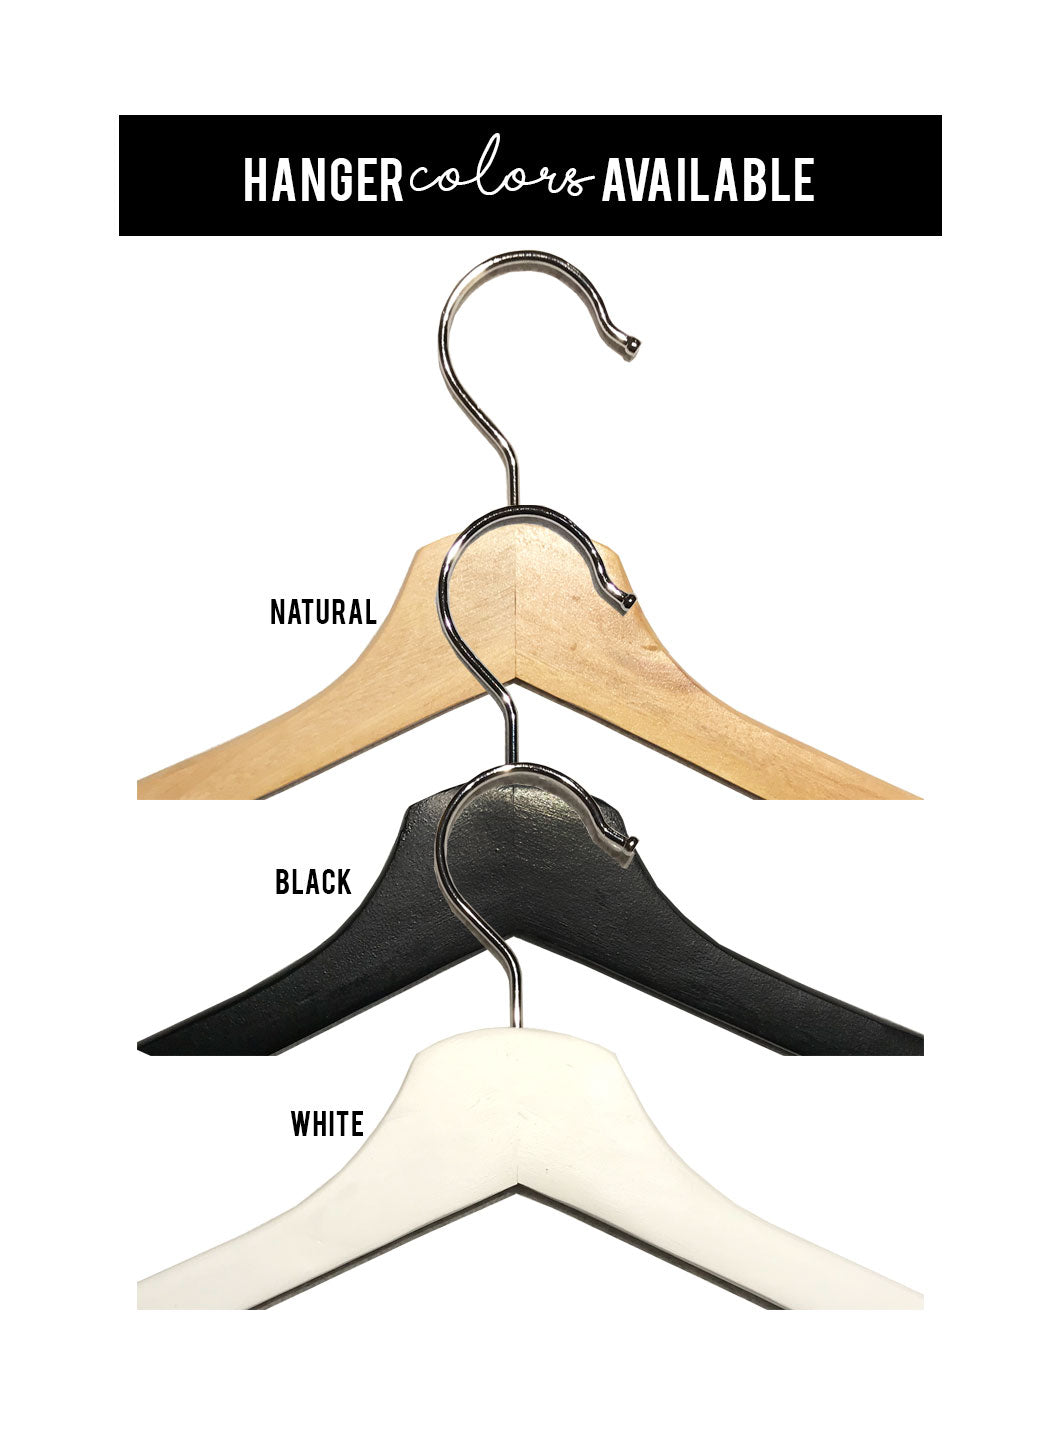 Personalized Hanger - F